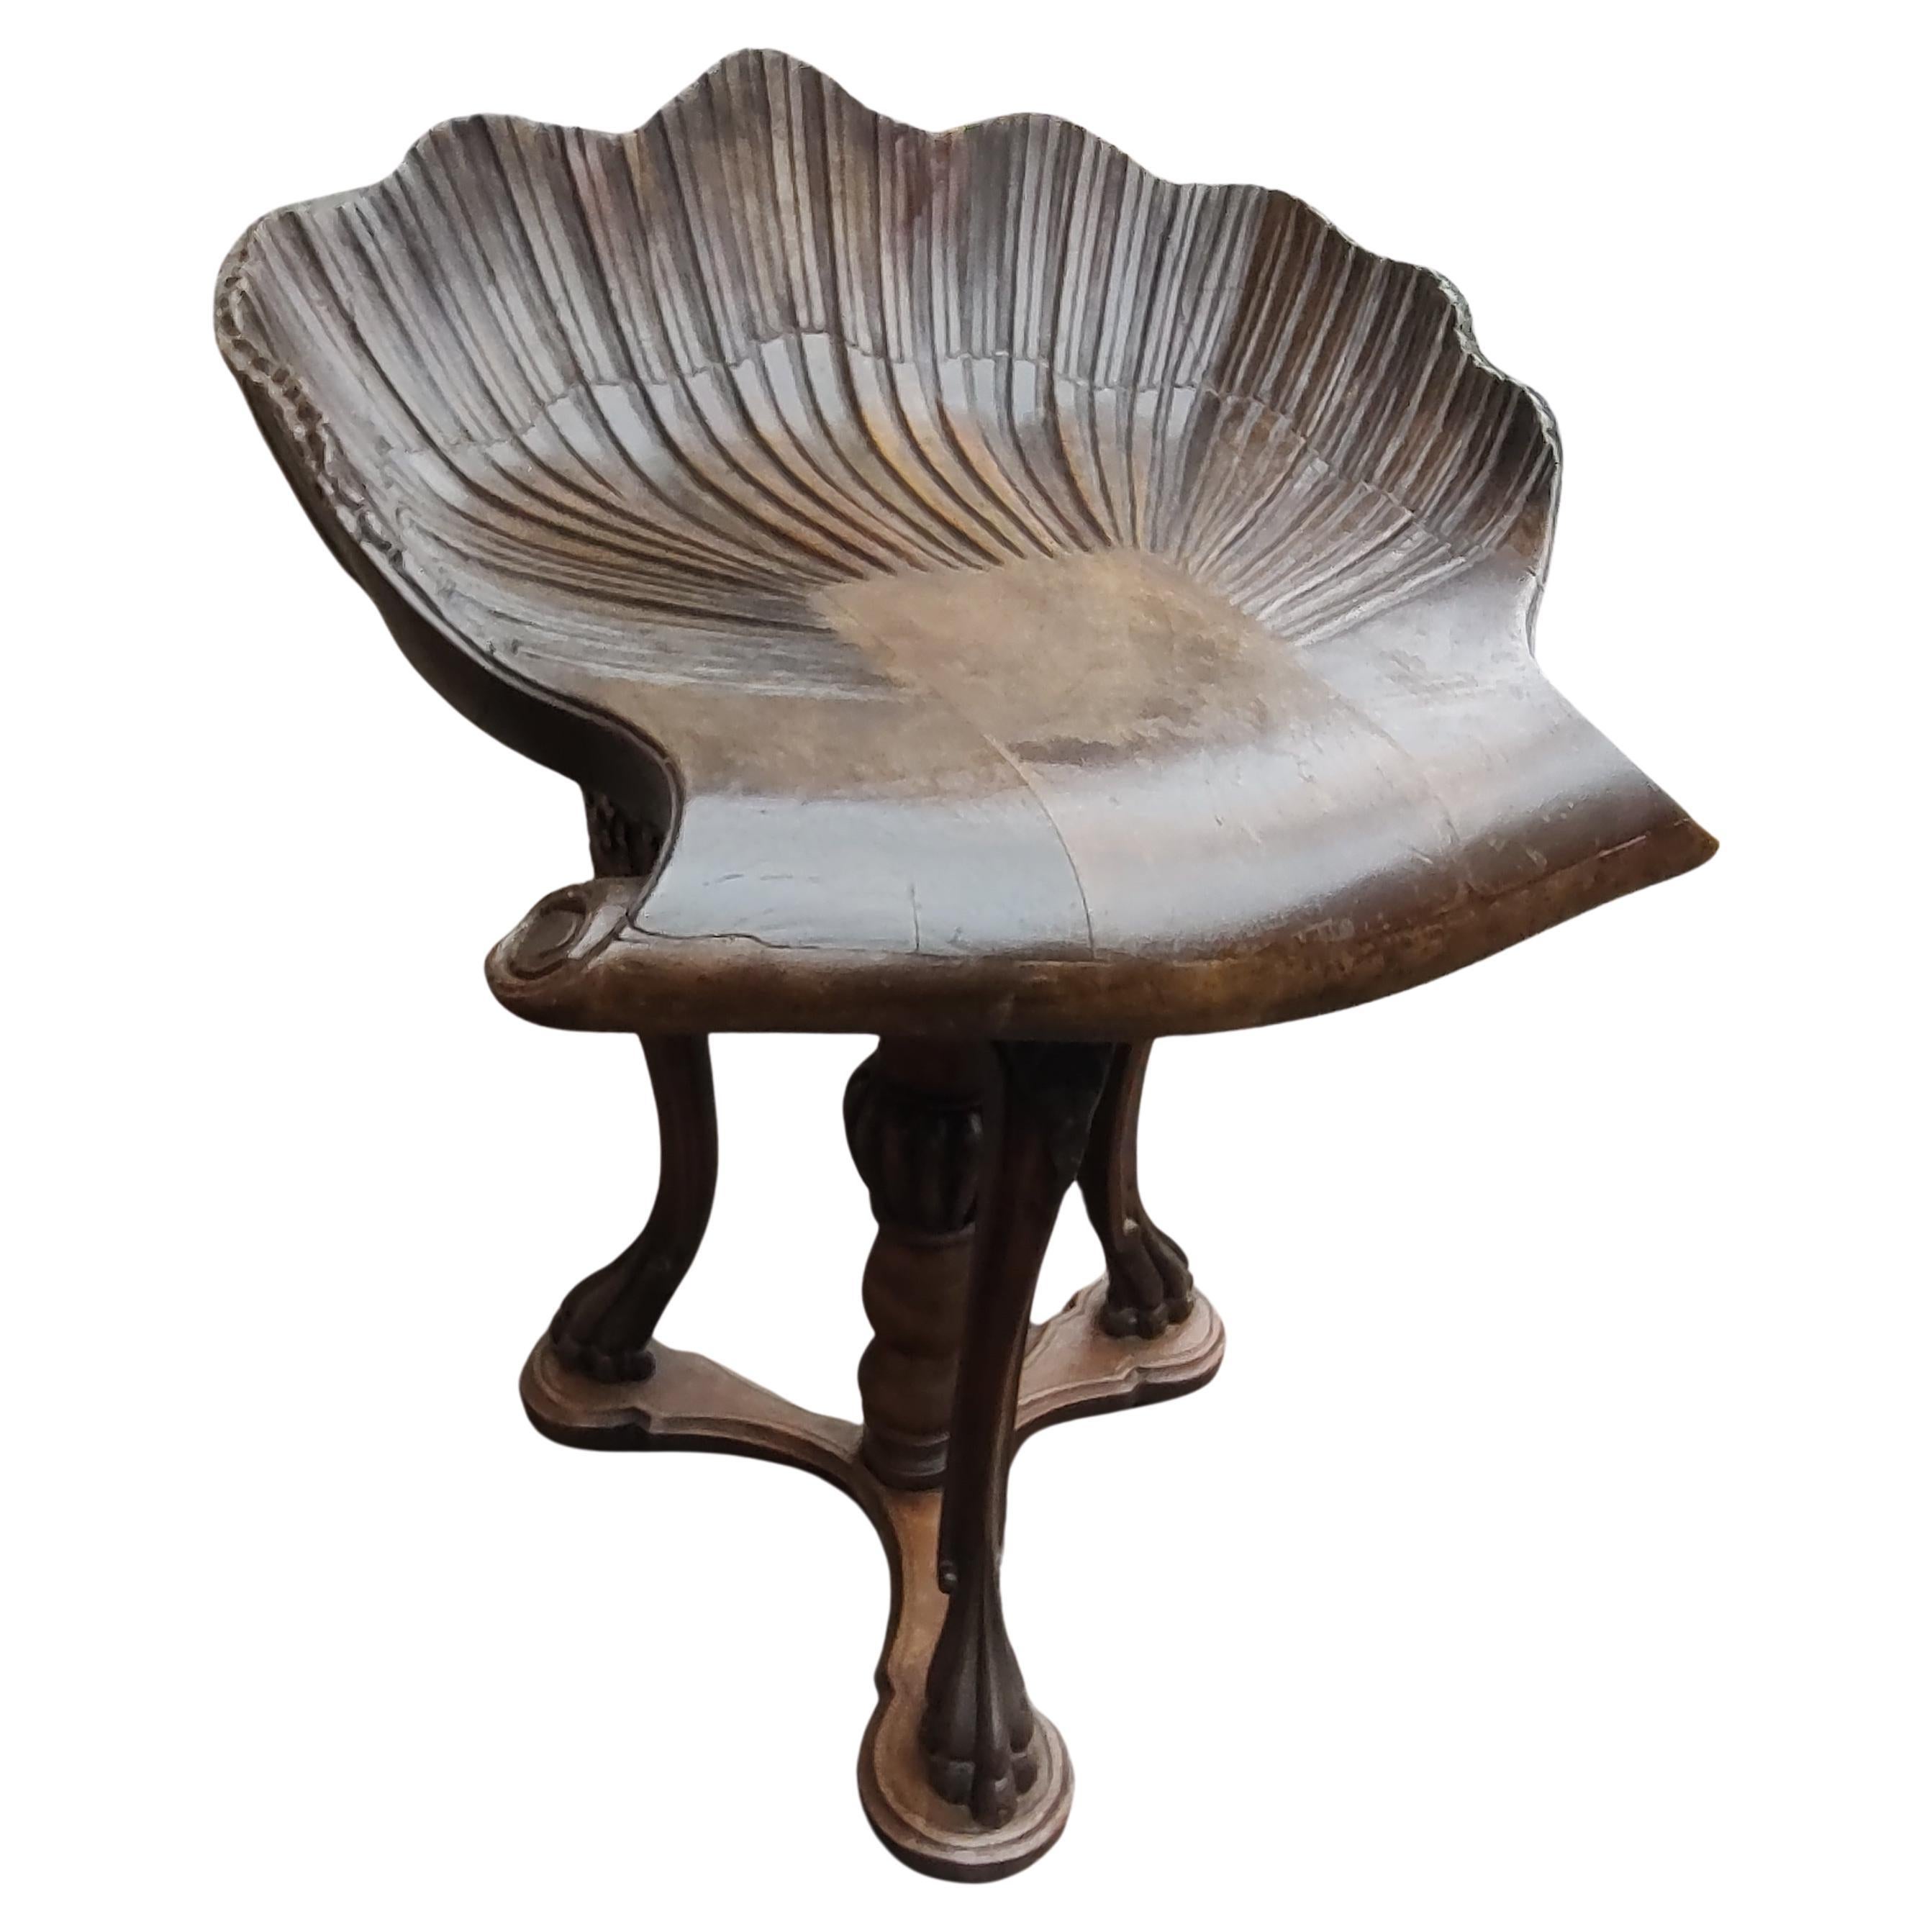 Neoclassical Carved Walnut Grotto Shell Stool Swivels In Good Condition For Sale In Port Jervis, NY